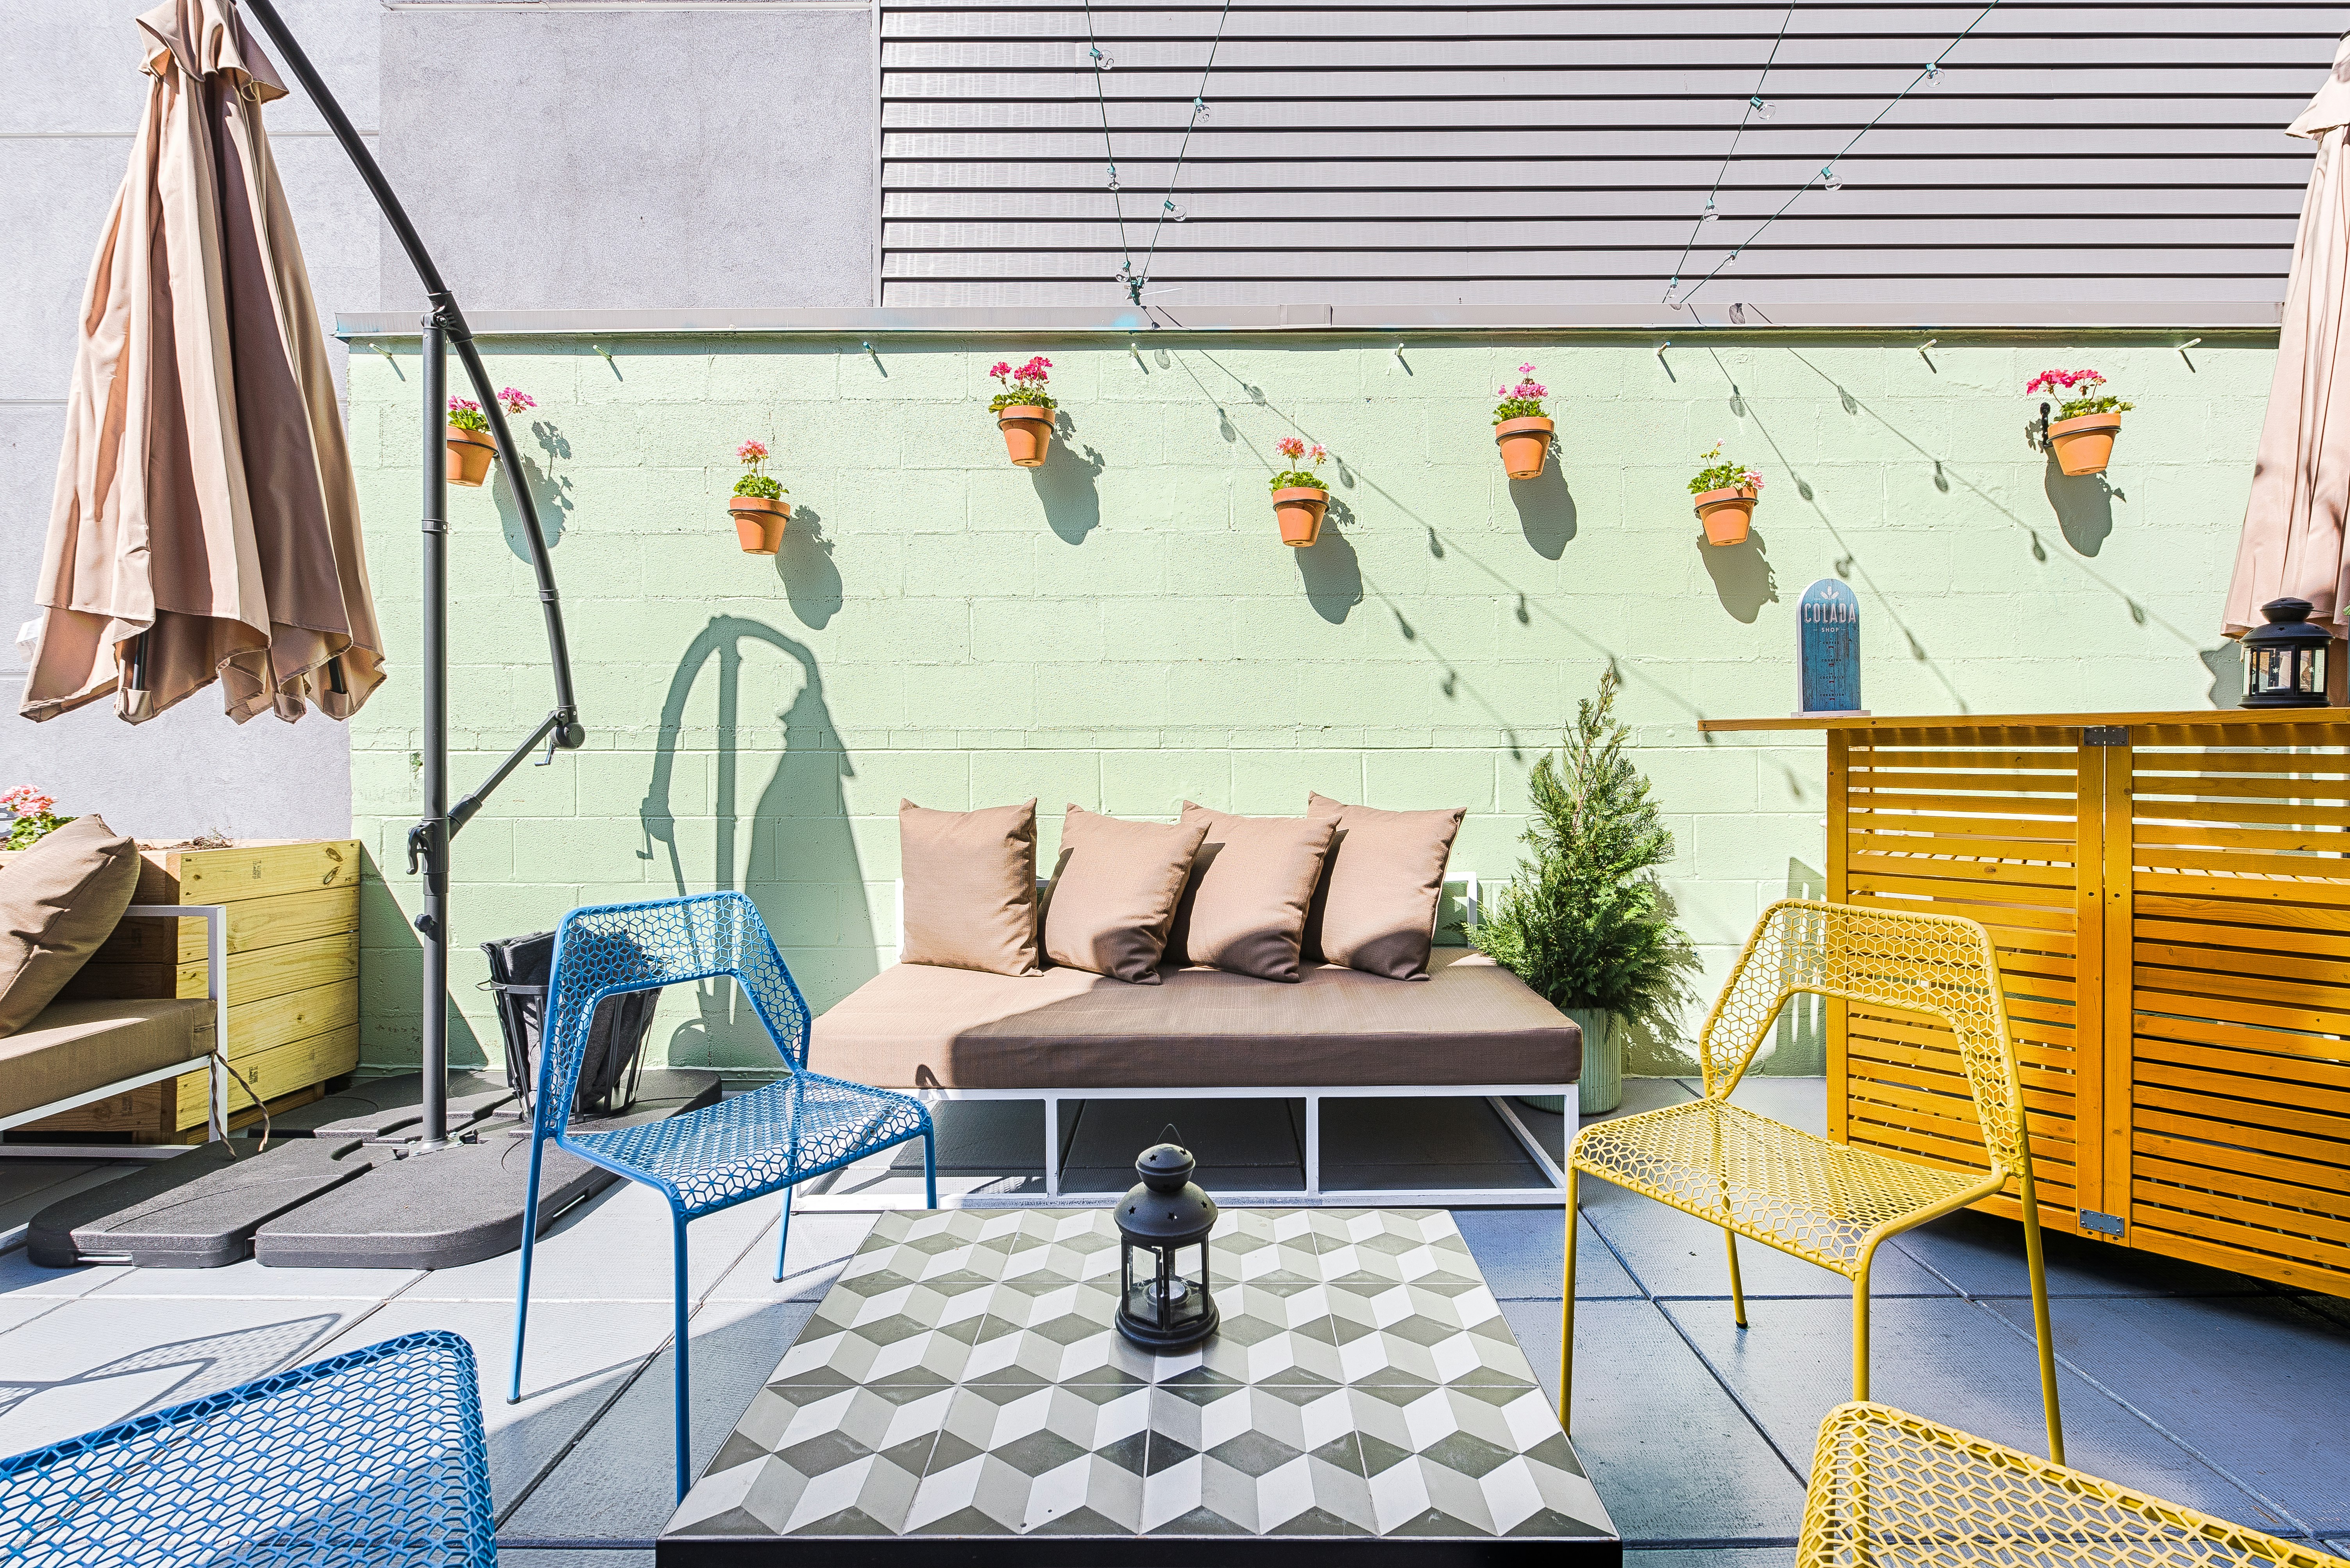 The walls and artistically arranged minimalist furniture has been painted in pastel shades at Colada Shop rooftop bar.